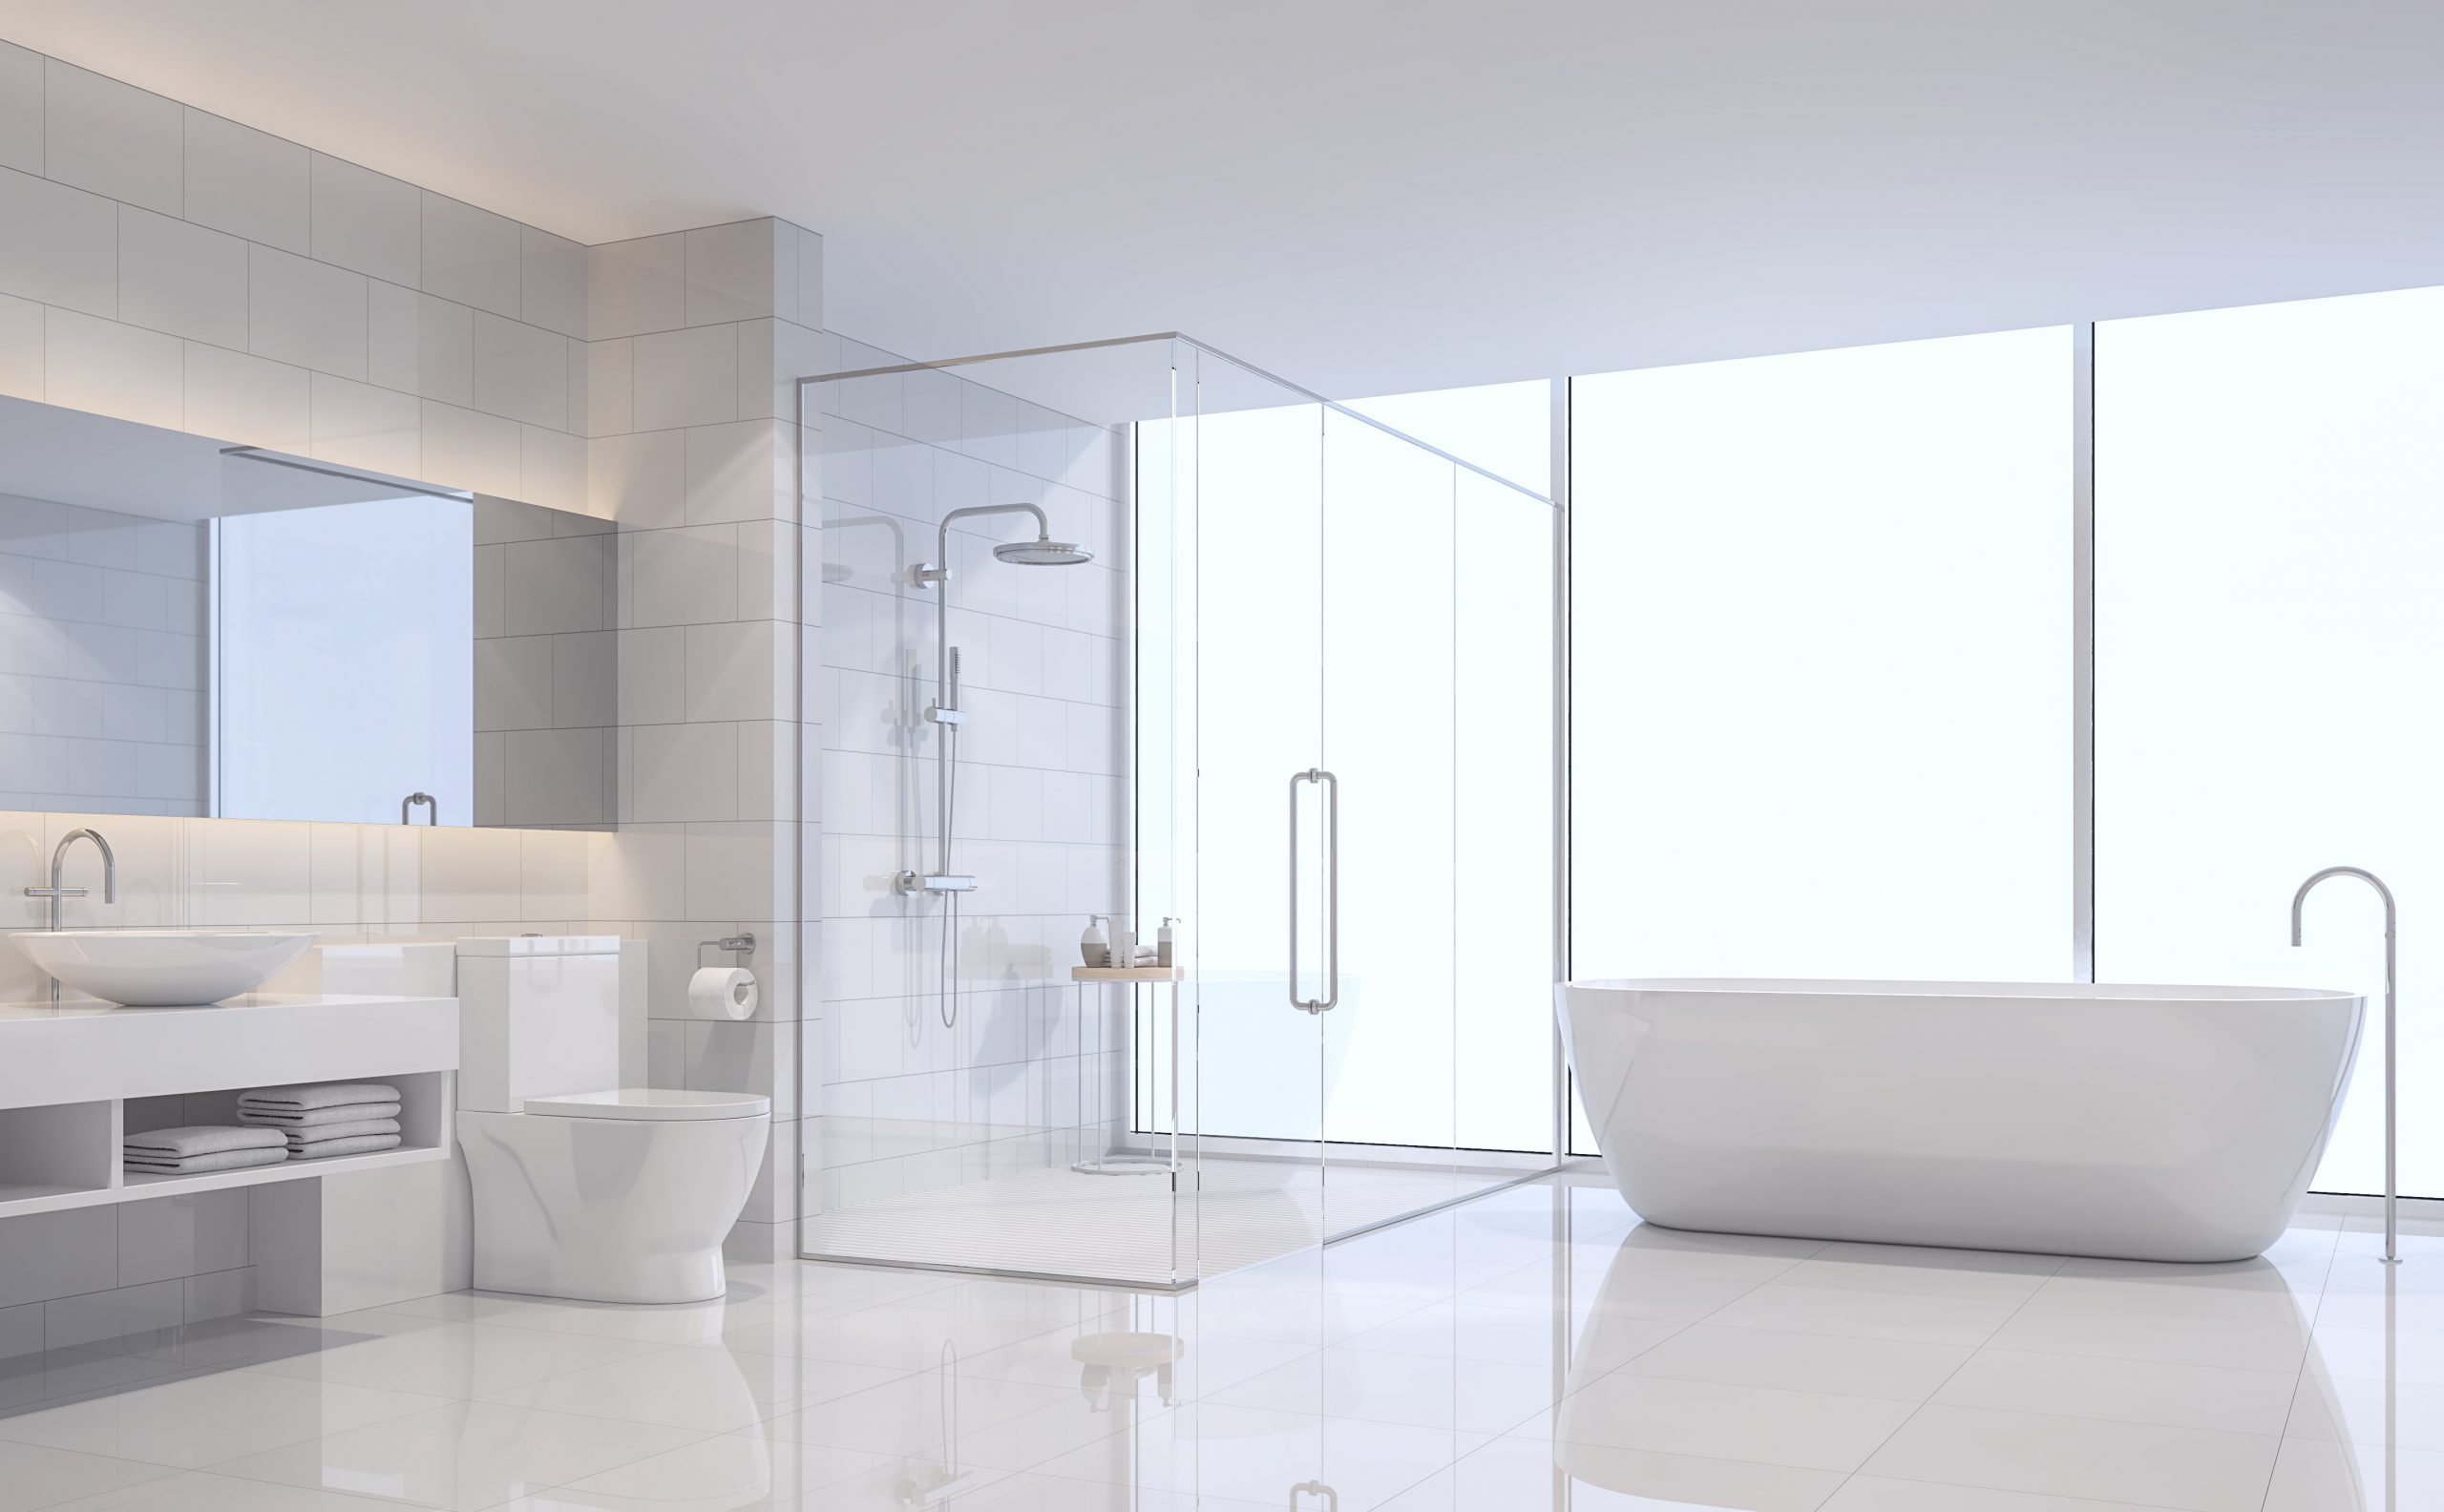 Modern white bathroom 3d rendering image. There are white tile wall and floor.The room has large windows. Looking out to see the scenery outside.